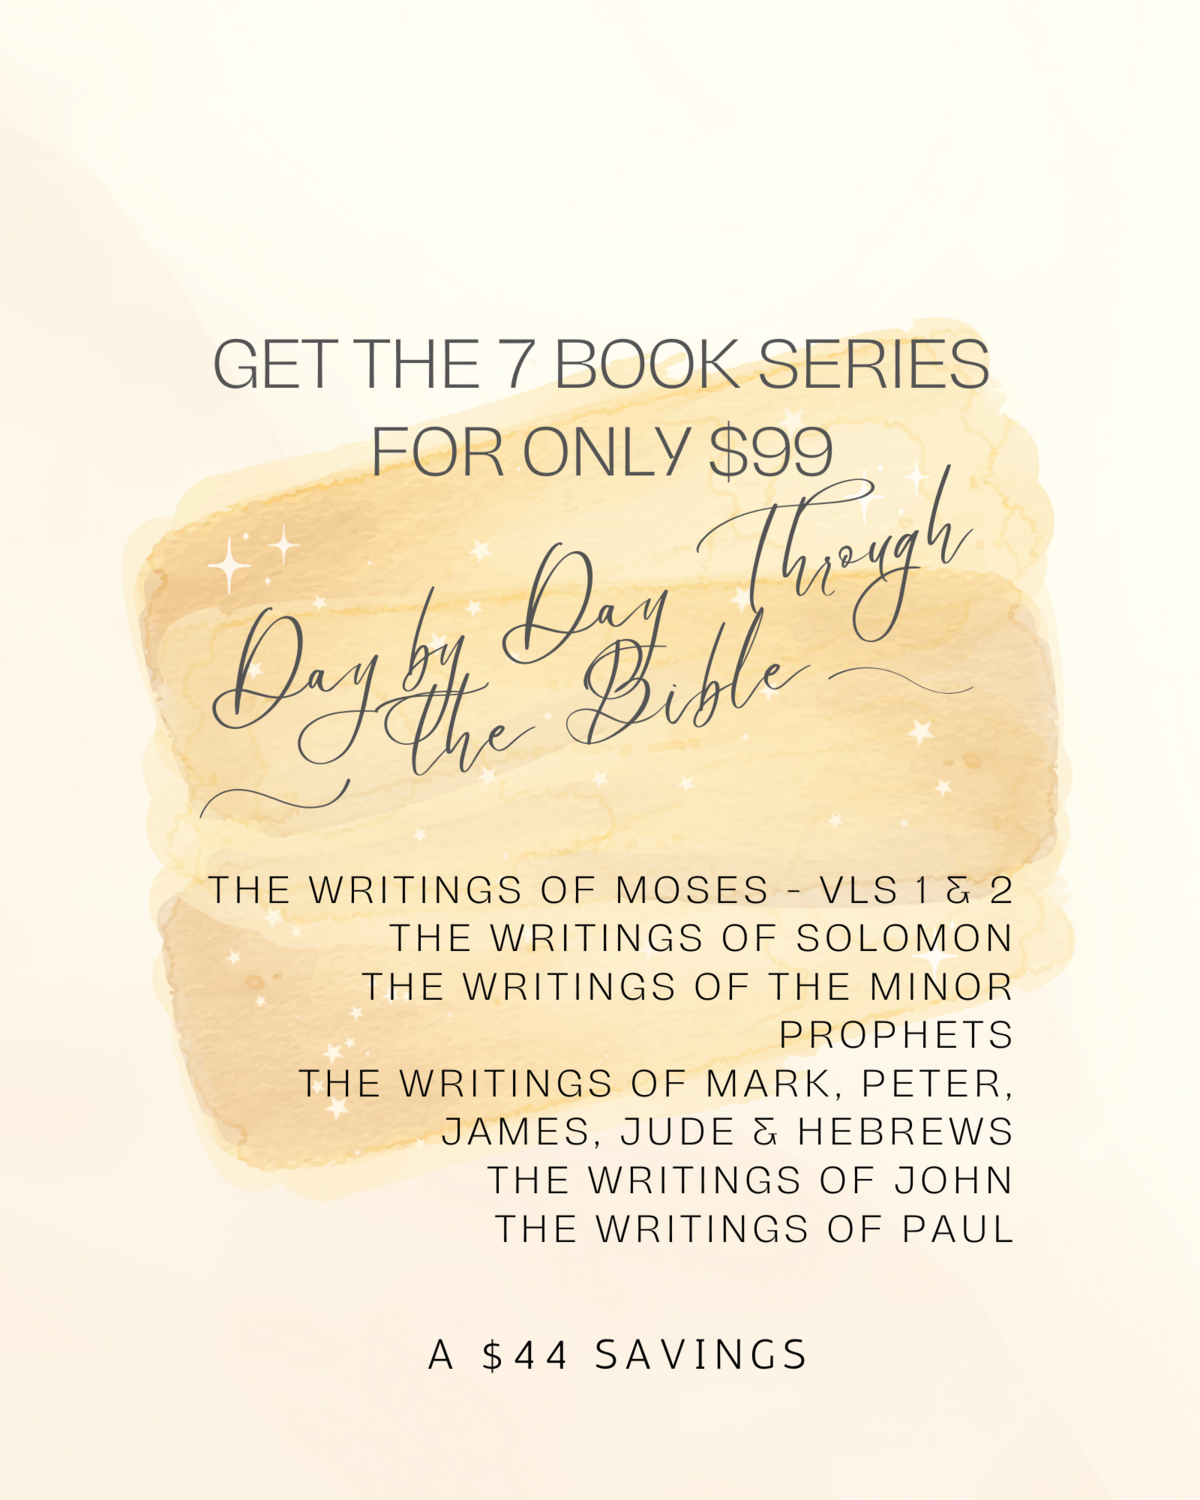 Day by Day Through the Bible - 7 Book Series